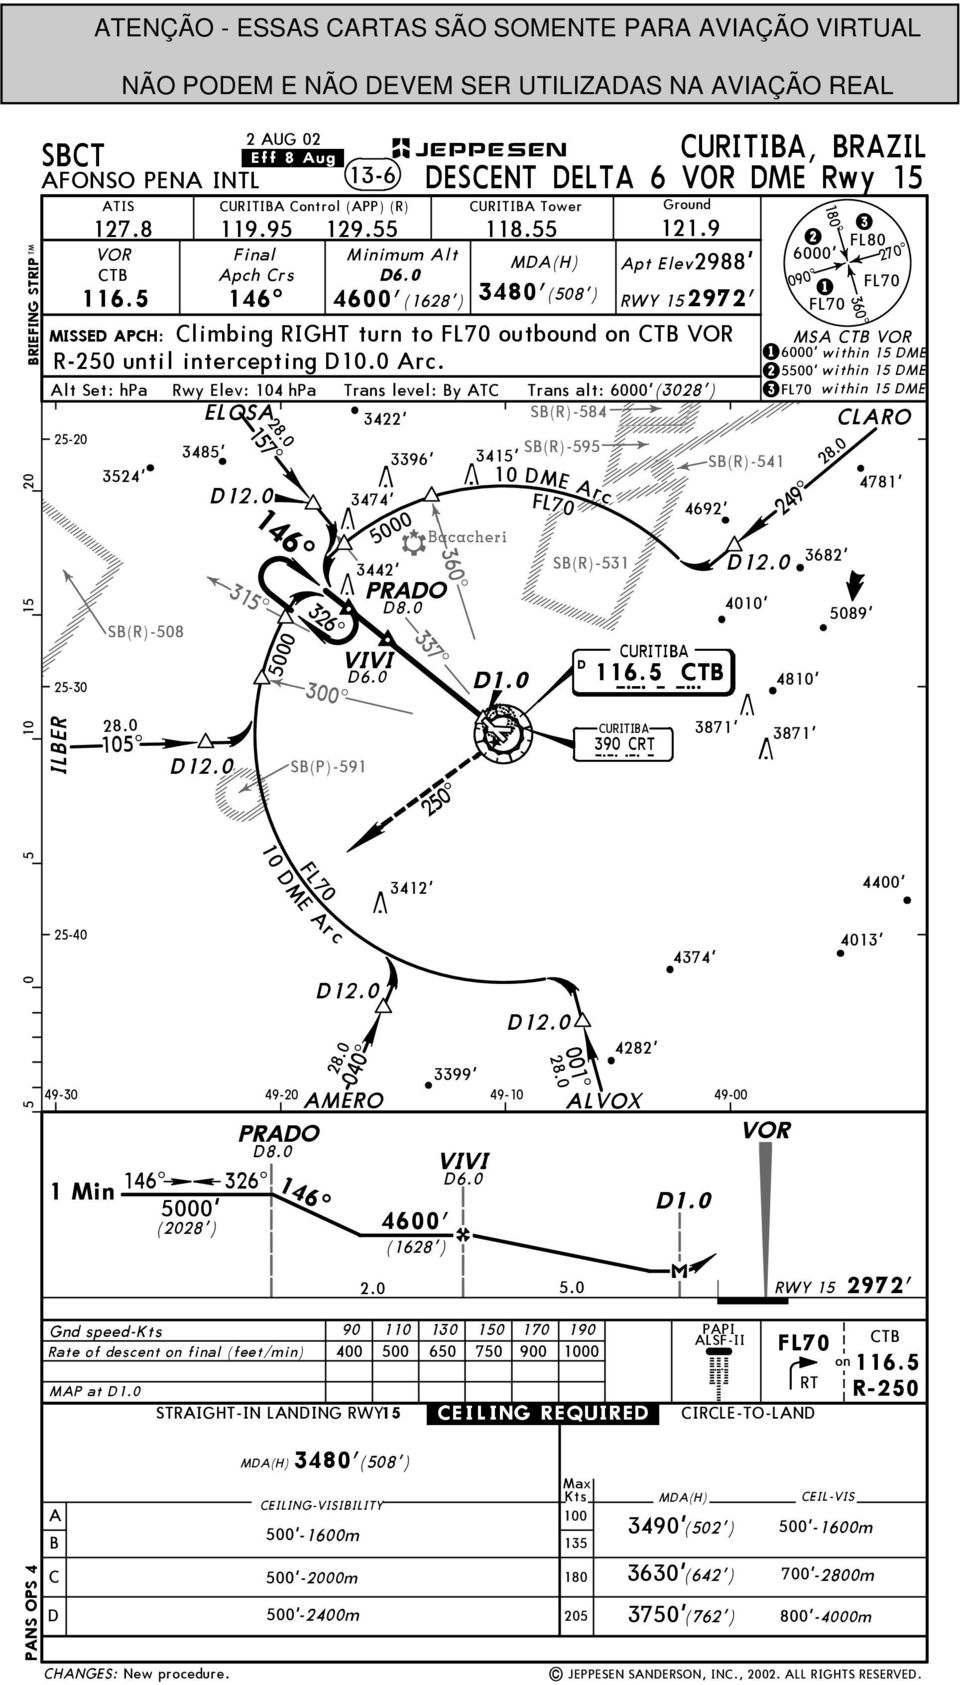 0 146^ 4600'(1628') 3480'(508') RWY 152972' 116.5 MISSE PH: limbing RIGHT turn to outbound on T VOR R-250 until intercepting 10.0 rc.